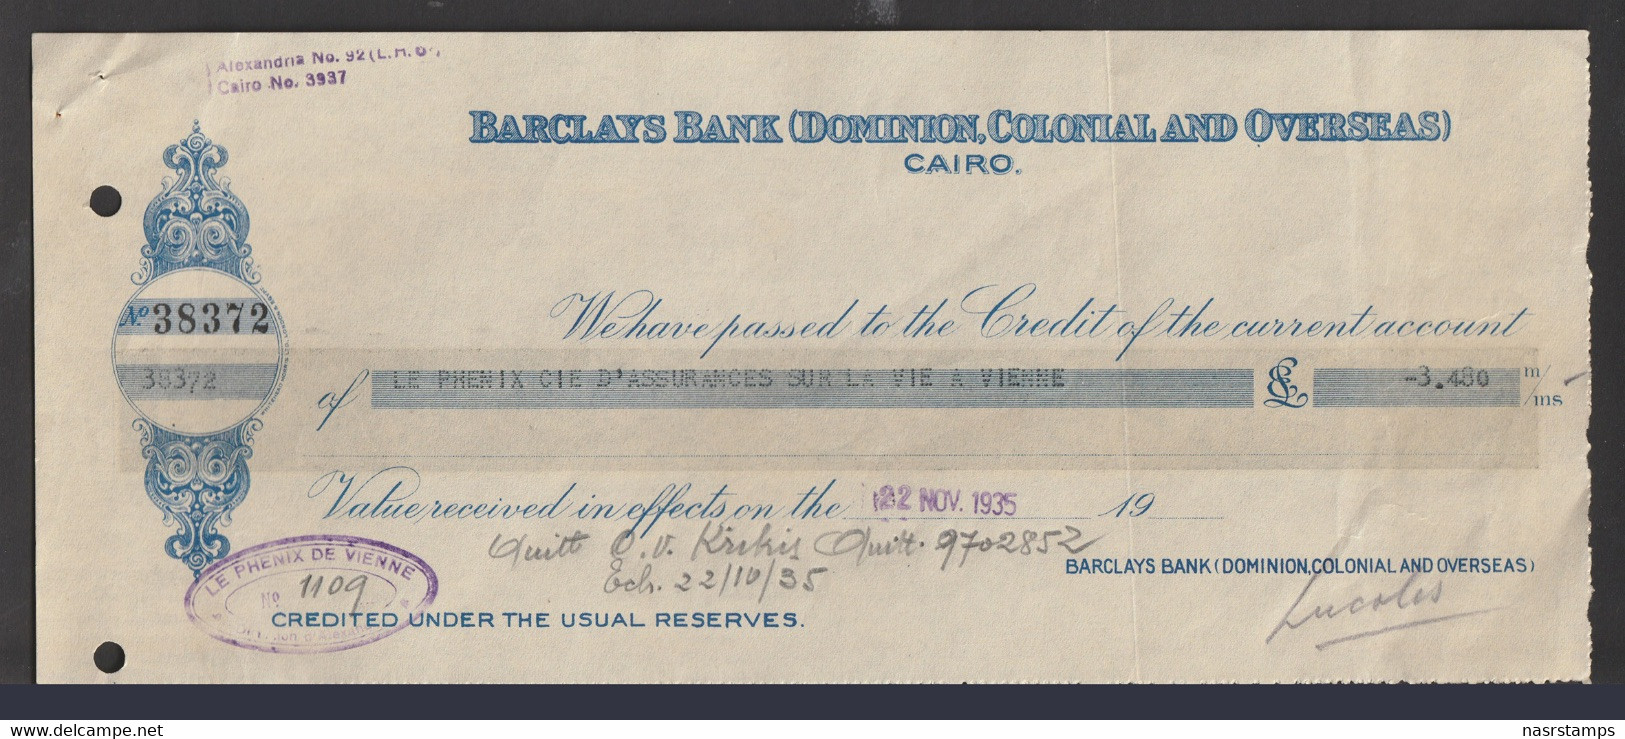 Egypt - 1935 - Vintage Check - Barclays Bank ( DOMINION, COLONIAL AND OVERSEAS - CAIRO ) - [ 5] Serie Coleccionistas